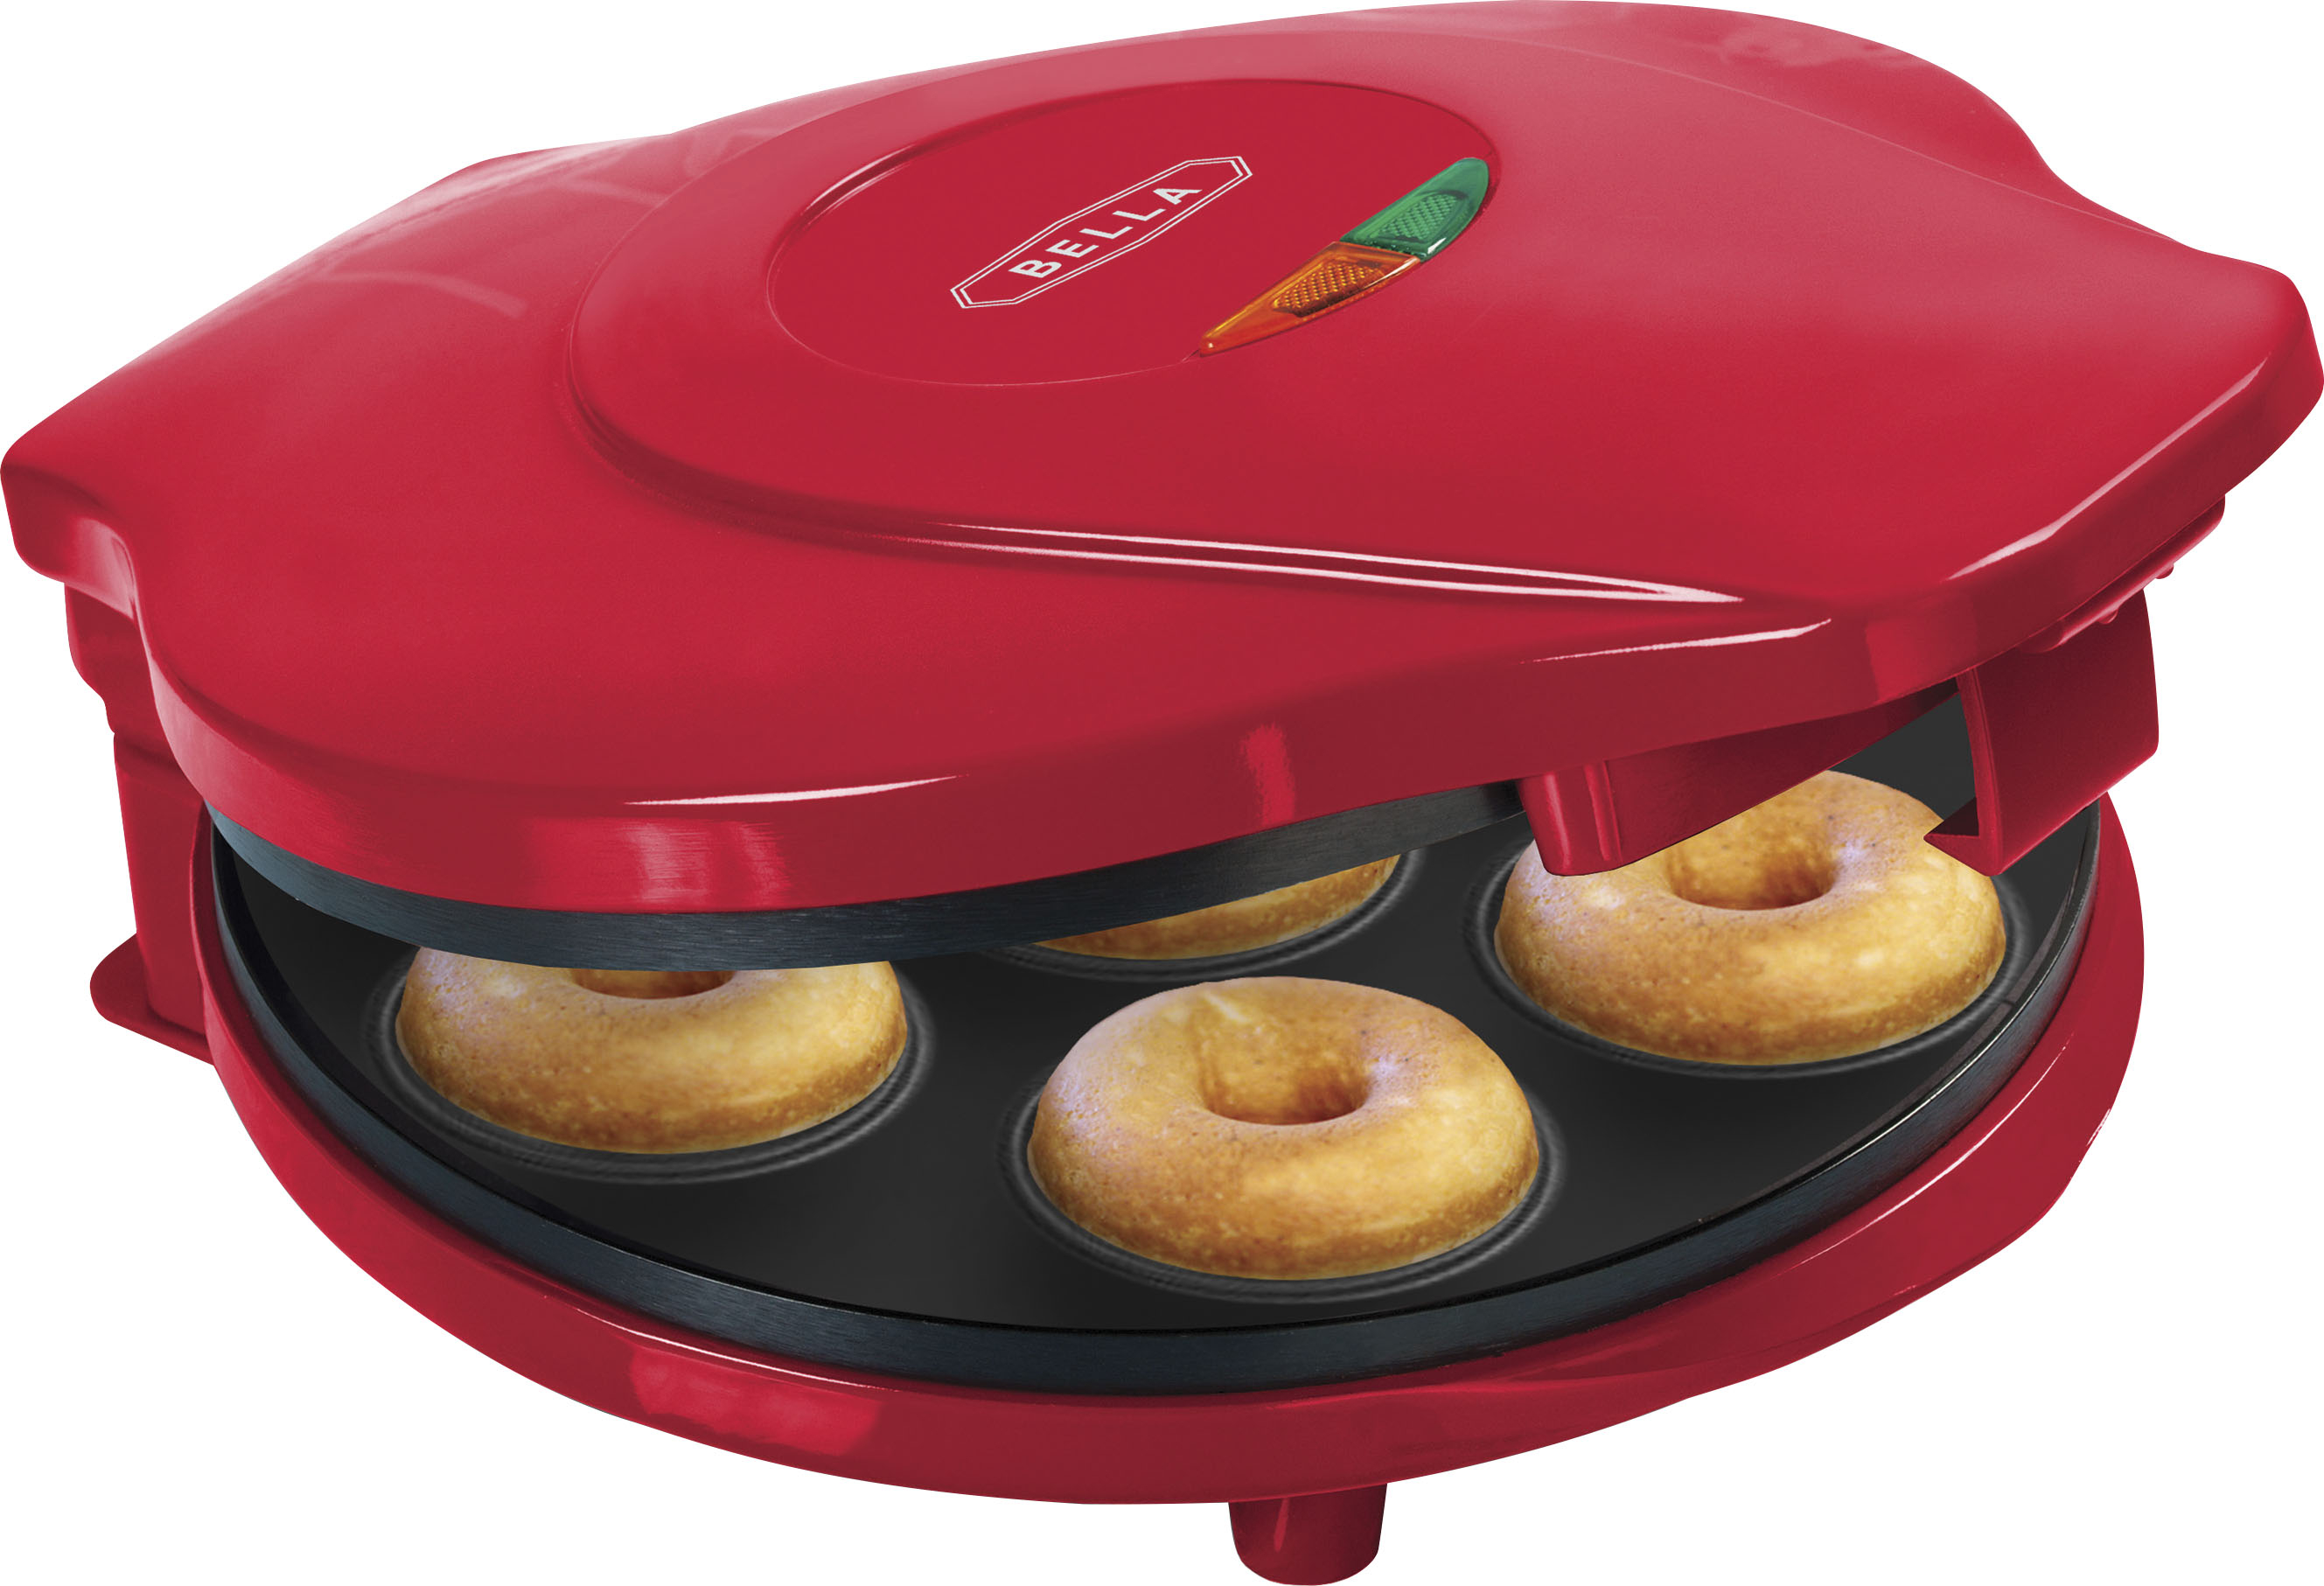 Details about   Donut Maker Machine Perfect Yeast Doughnuts Babycakes Fried Mini Bella Donuts 